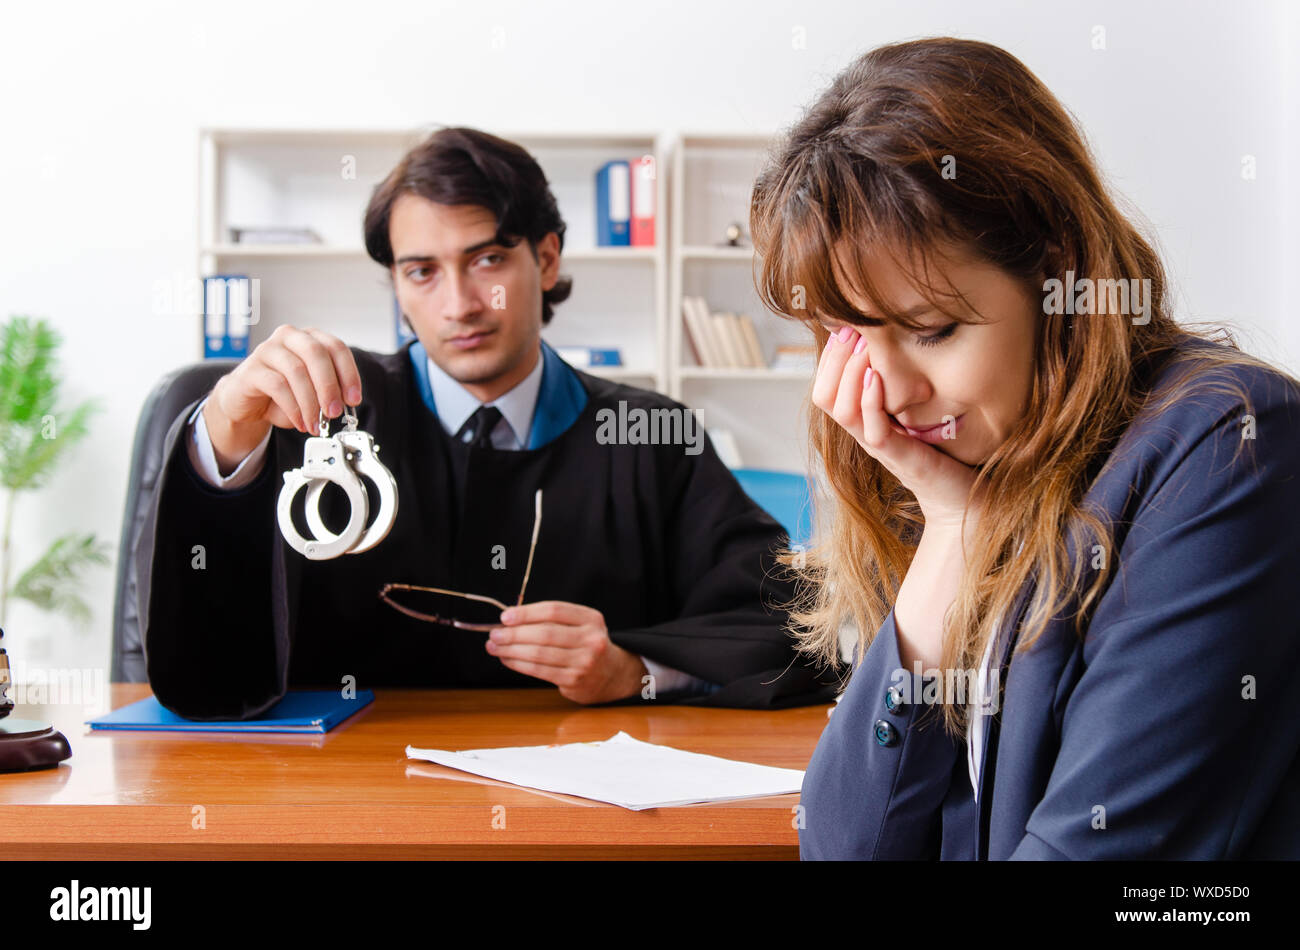 Young woman visiting male lawyer Stock Photo